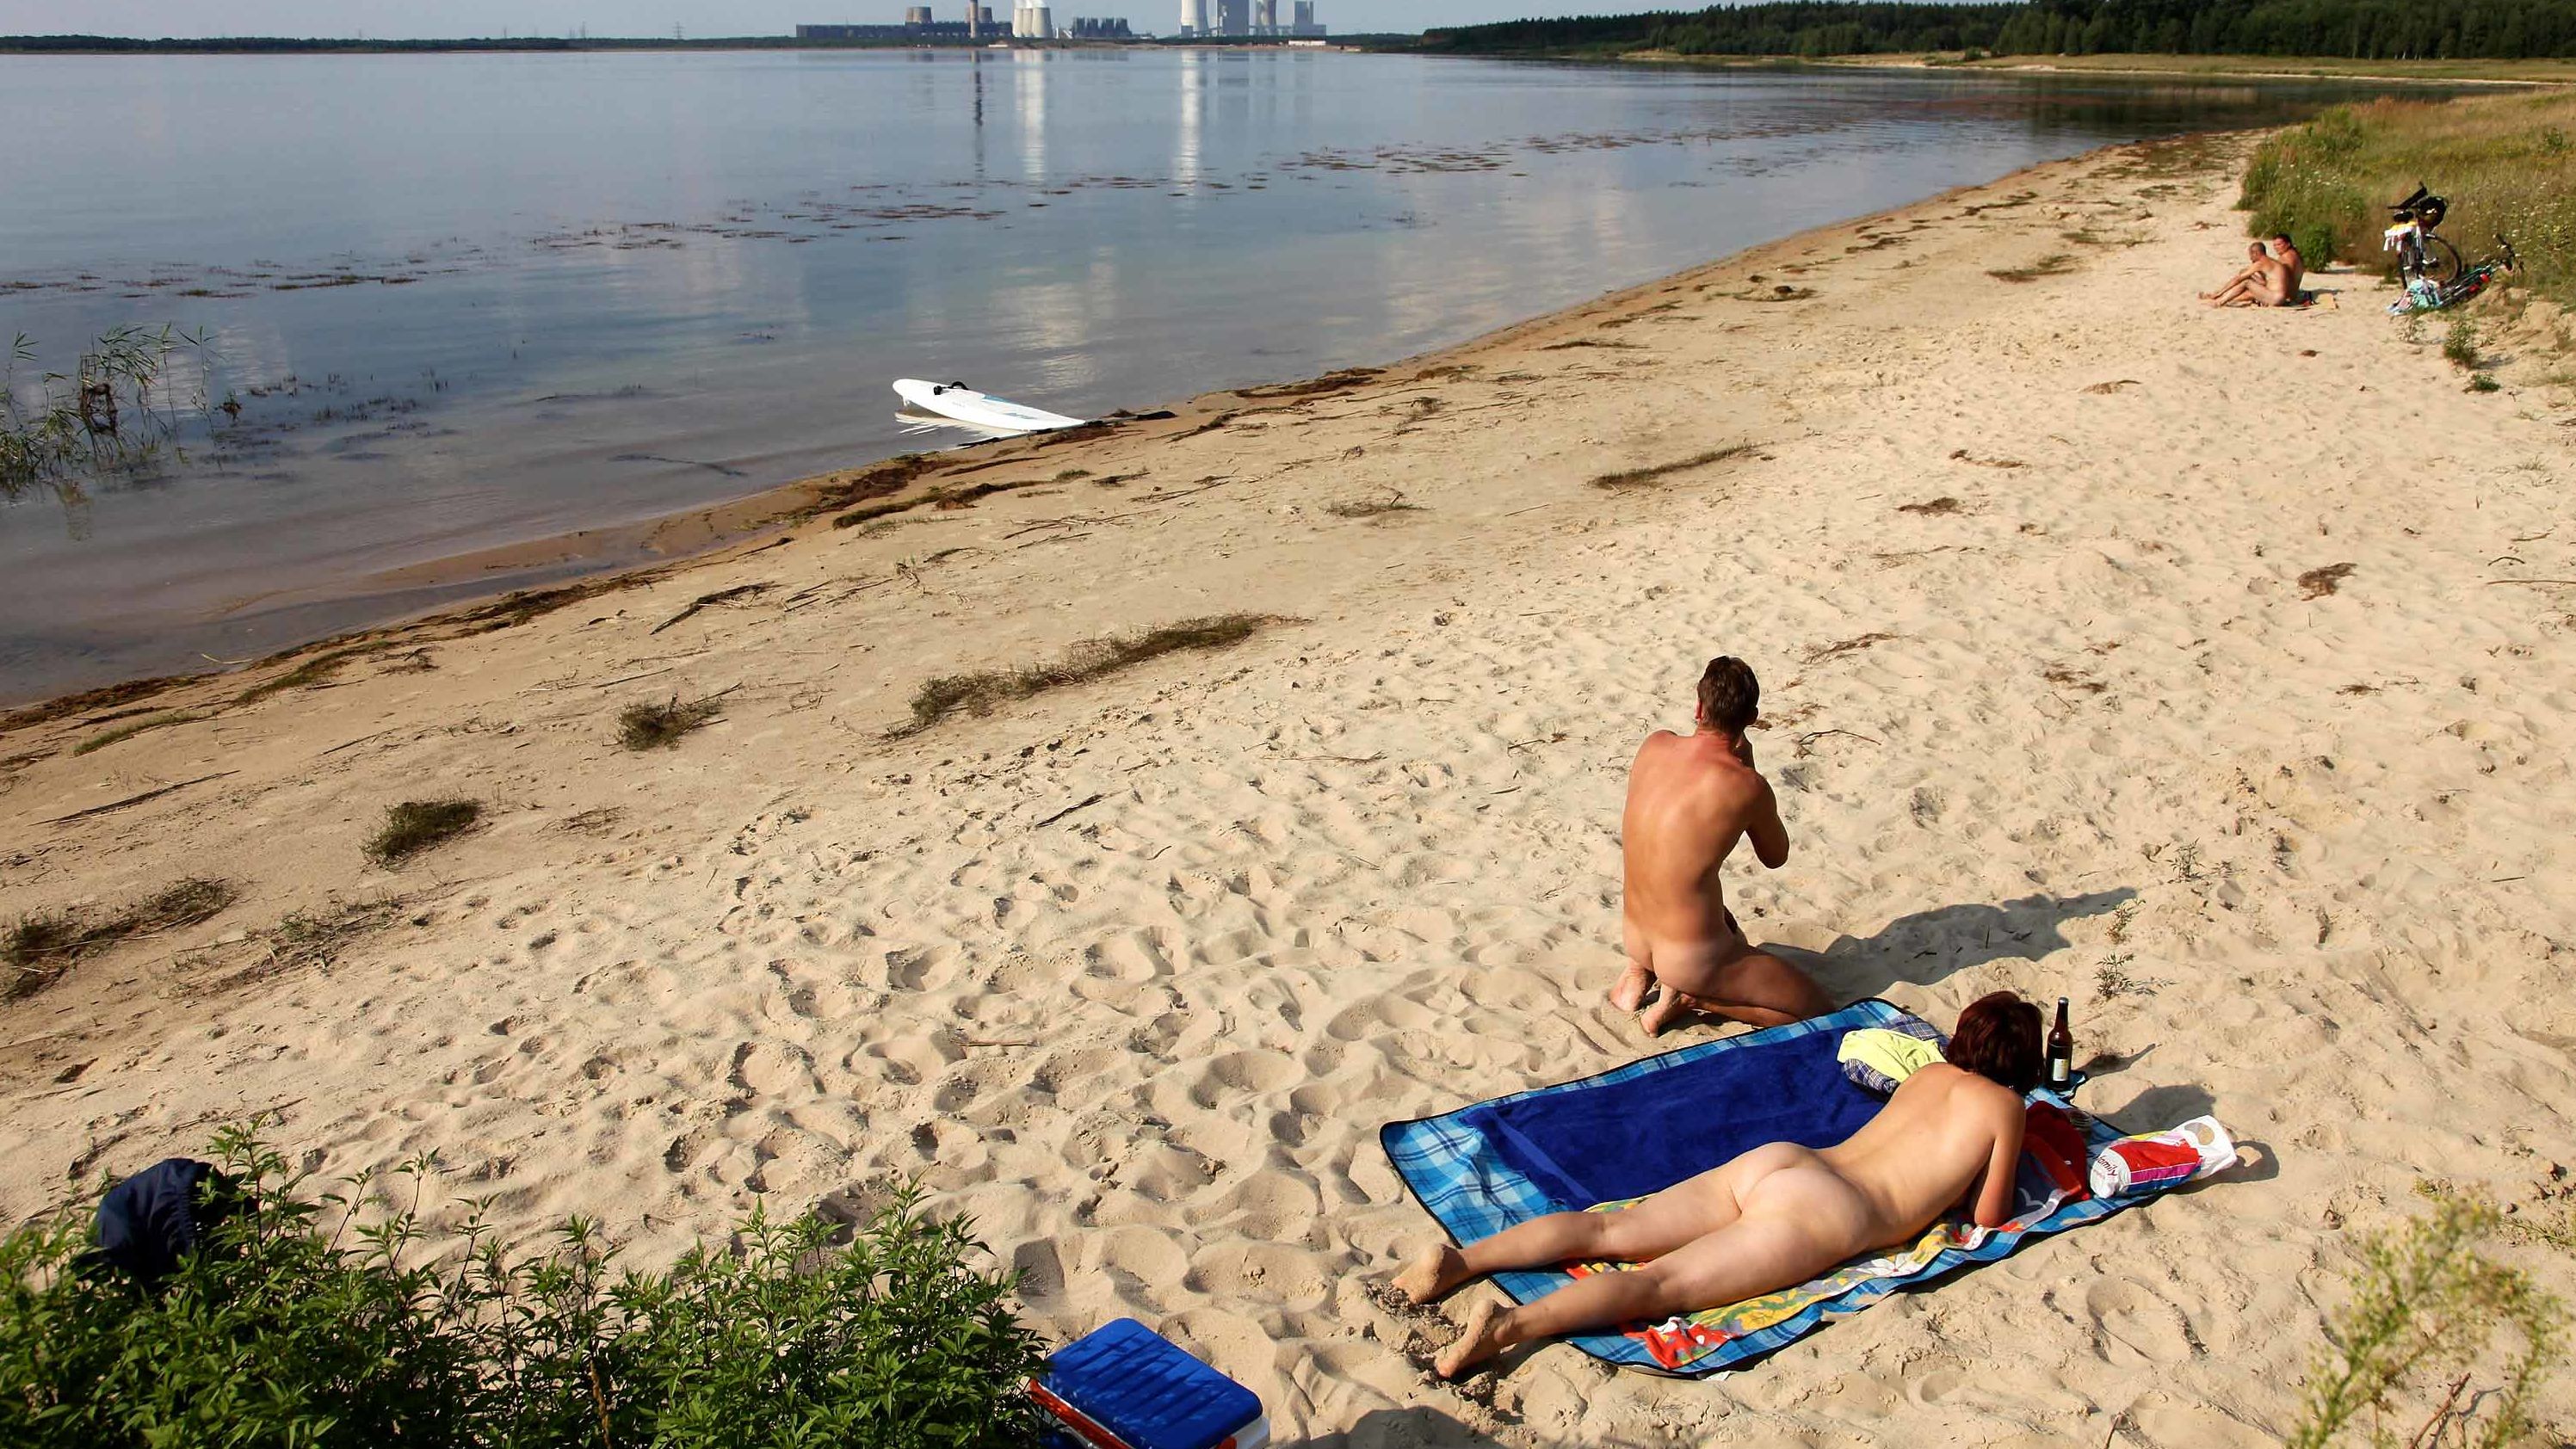 Nudist Colony Spread Legs - Nudity in Germany: The naked truth is revealed | CNN